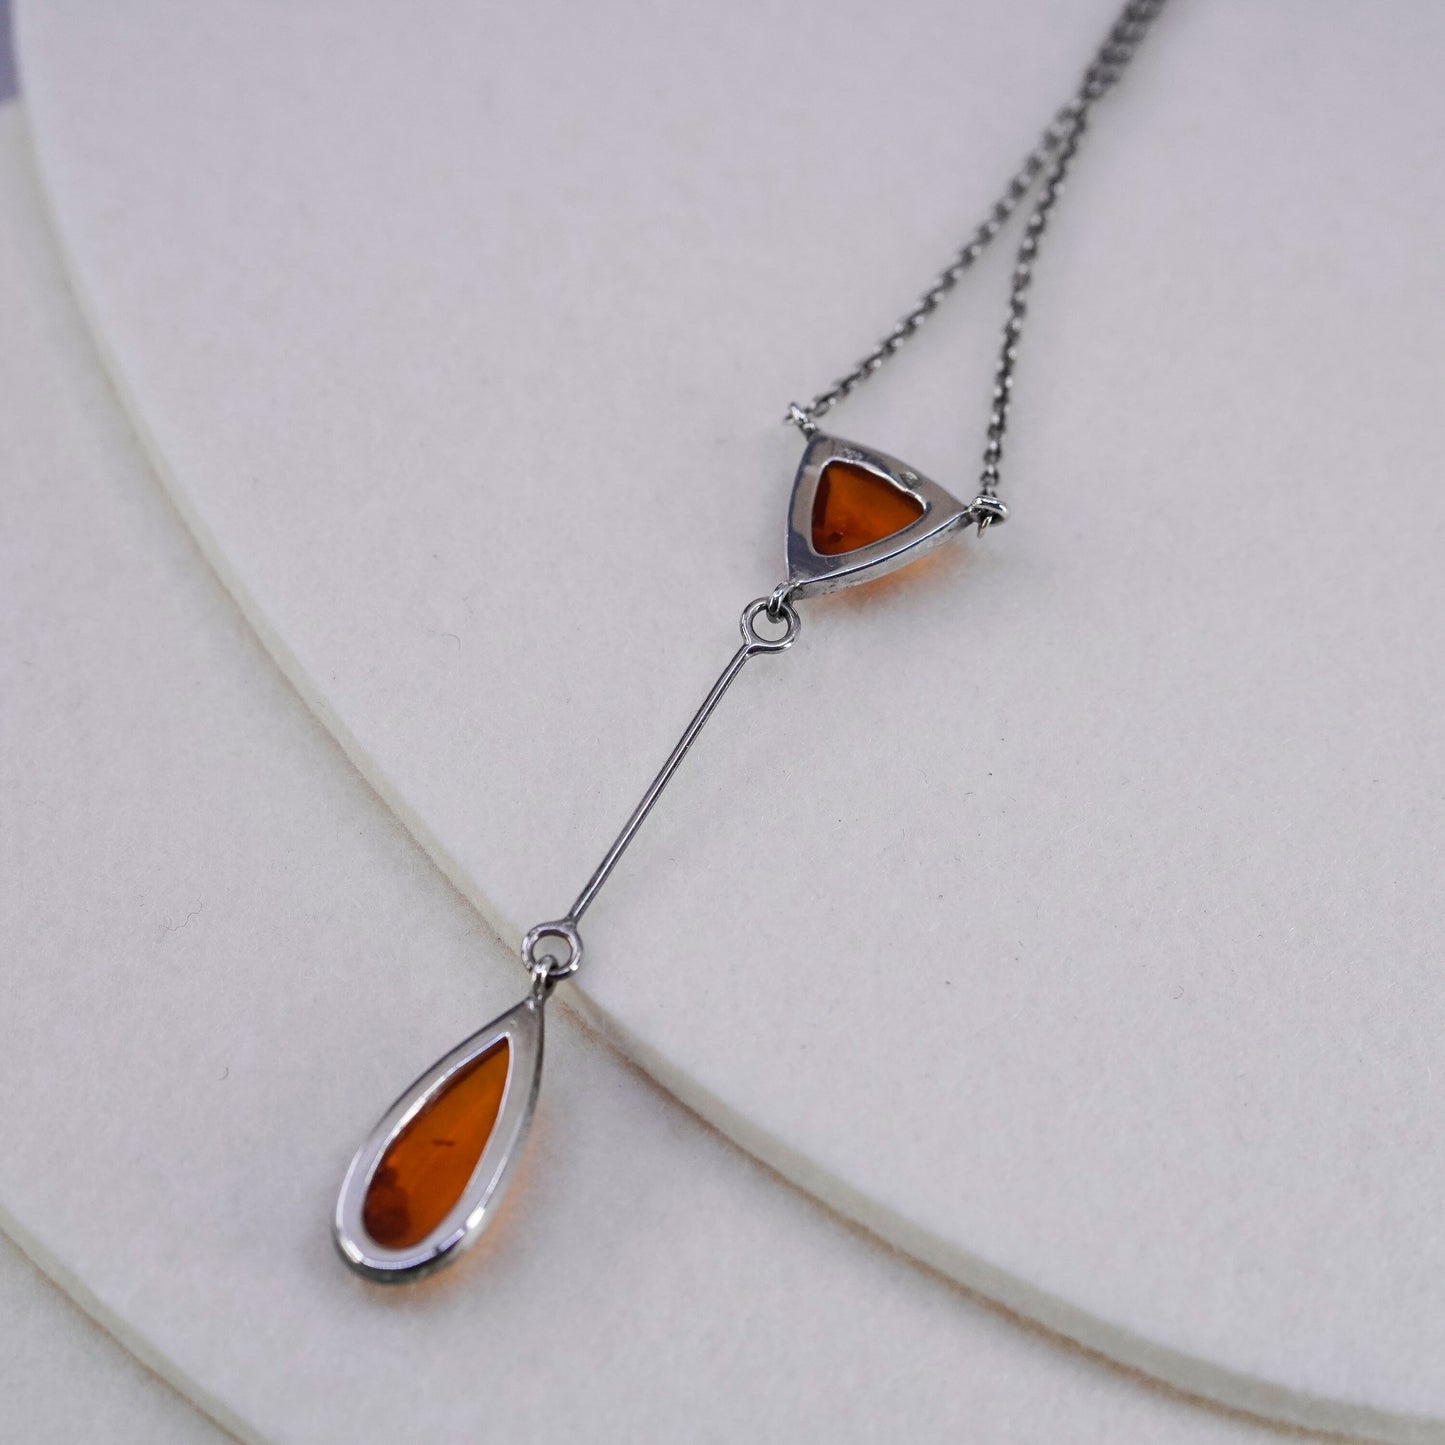 16”, vintage Sterling silver necklace, 925 circle chain with amber pendant